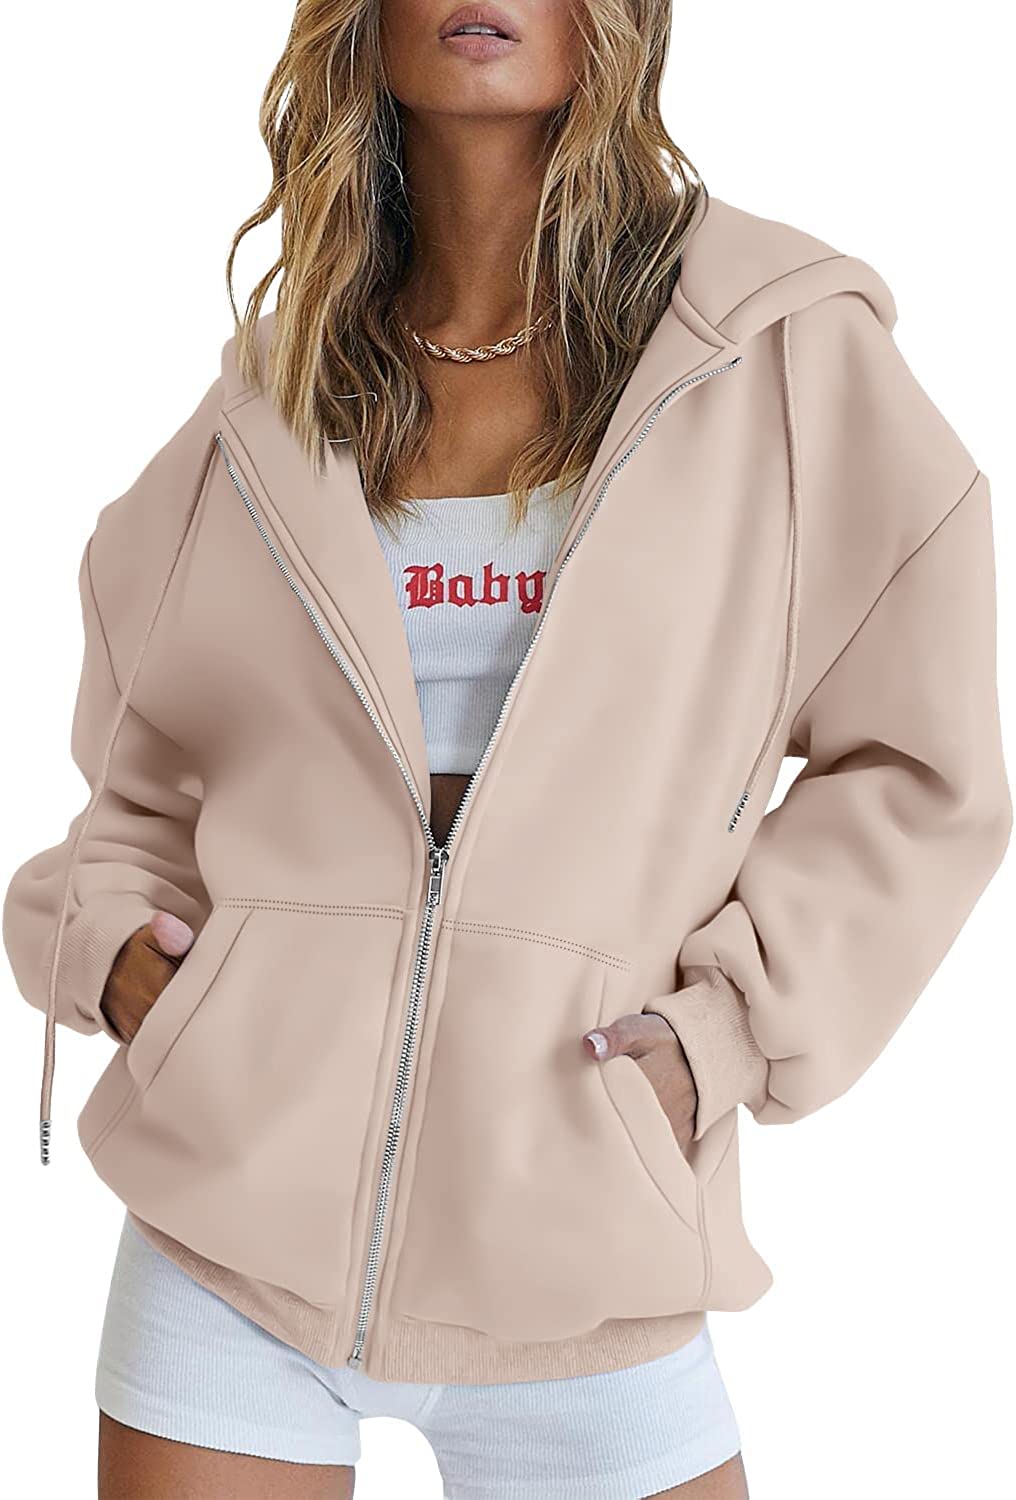 Black Trendy Queen Zip Up Hooded Sweatshirt For Women For Women Long  Sleeve, Oversized, Casual Fashion Jacket For Fall Outfits From  Candy20211228, $21.95